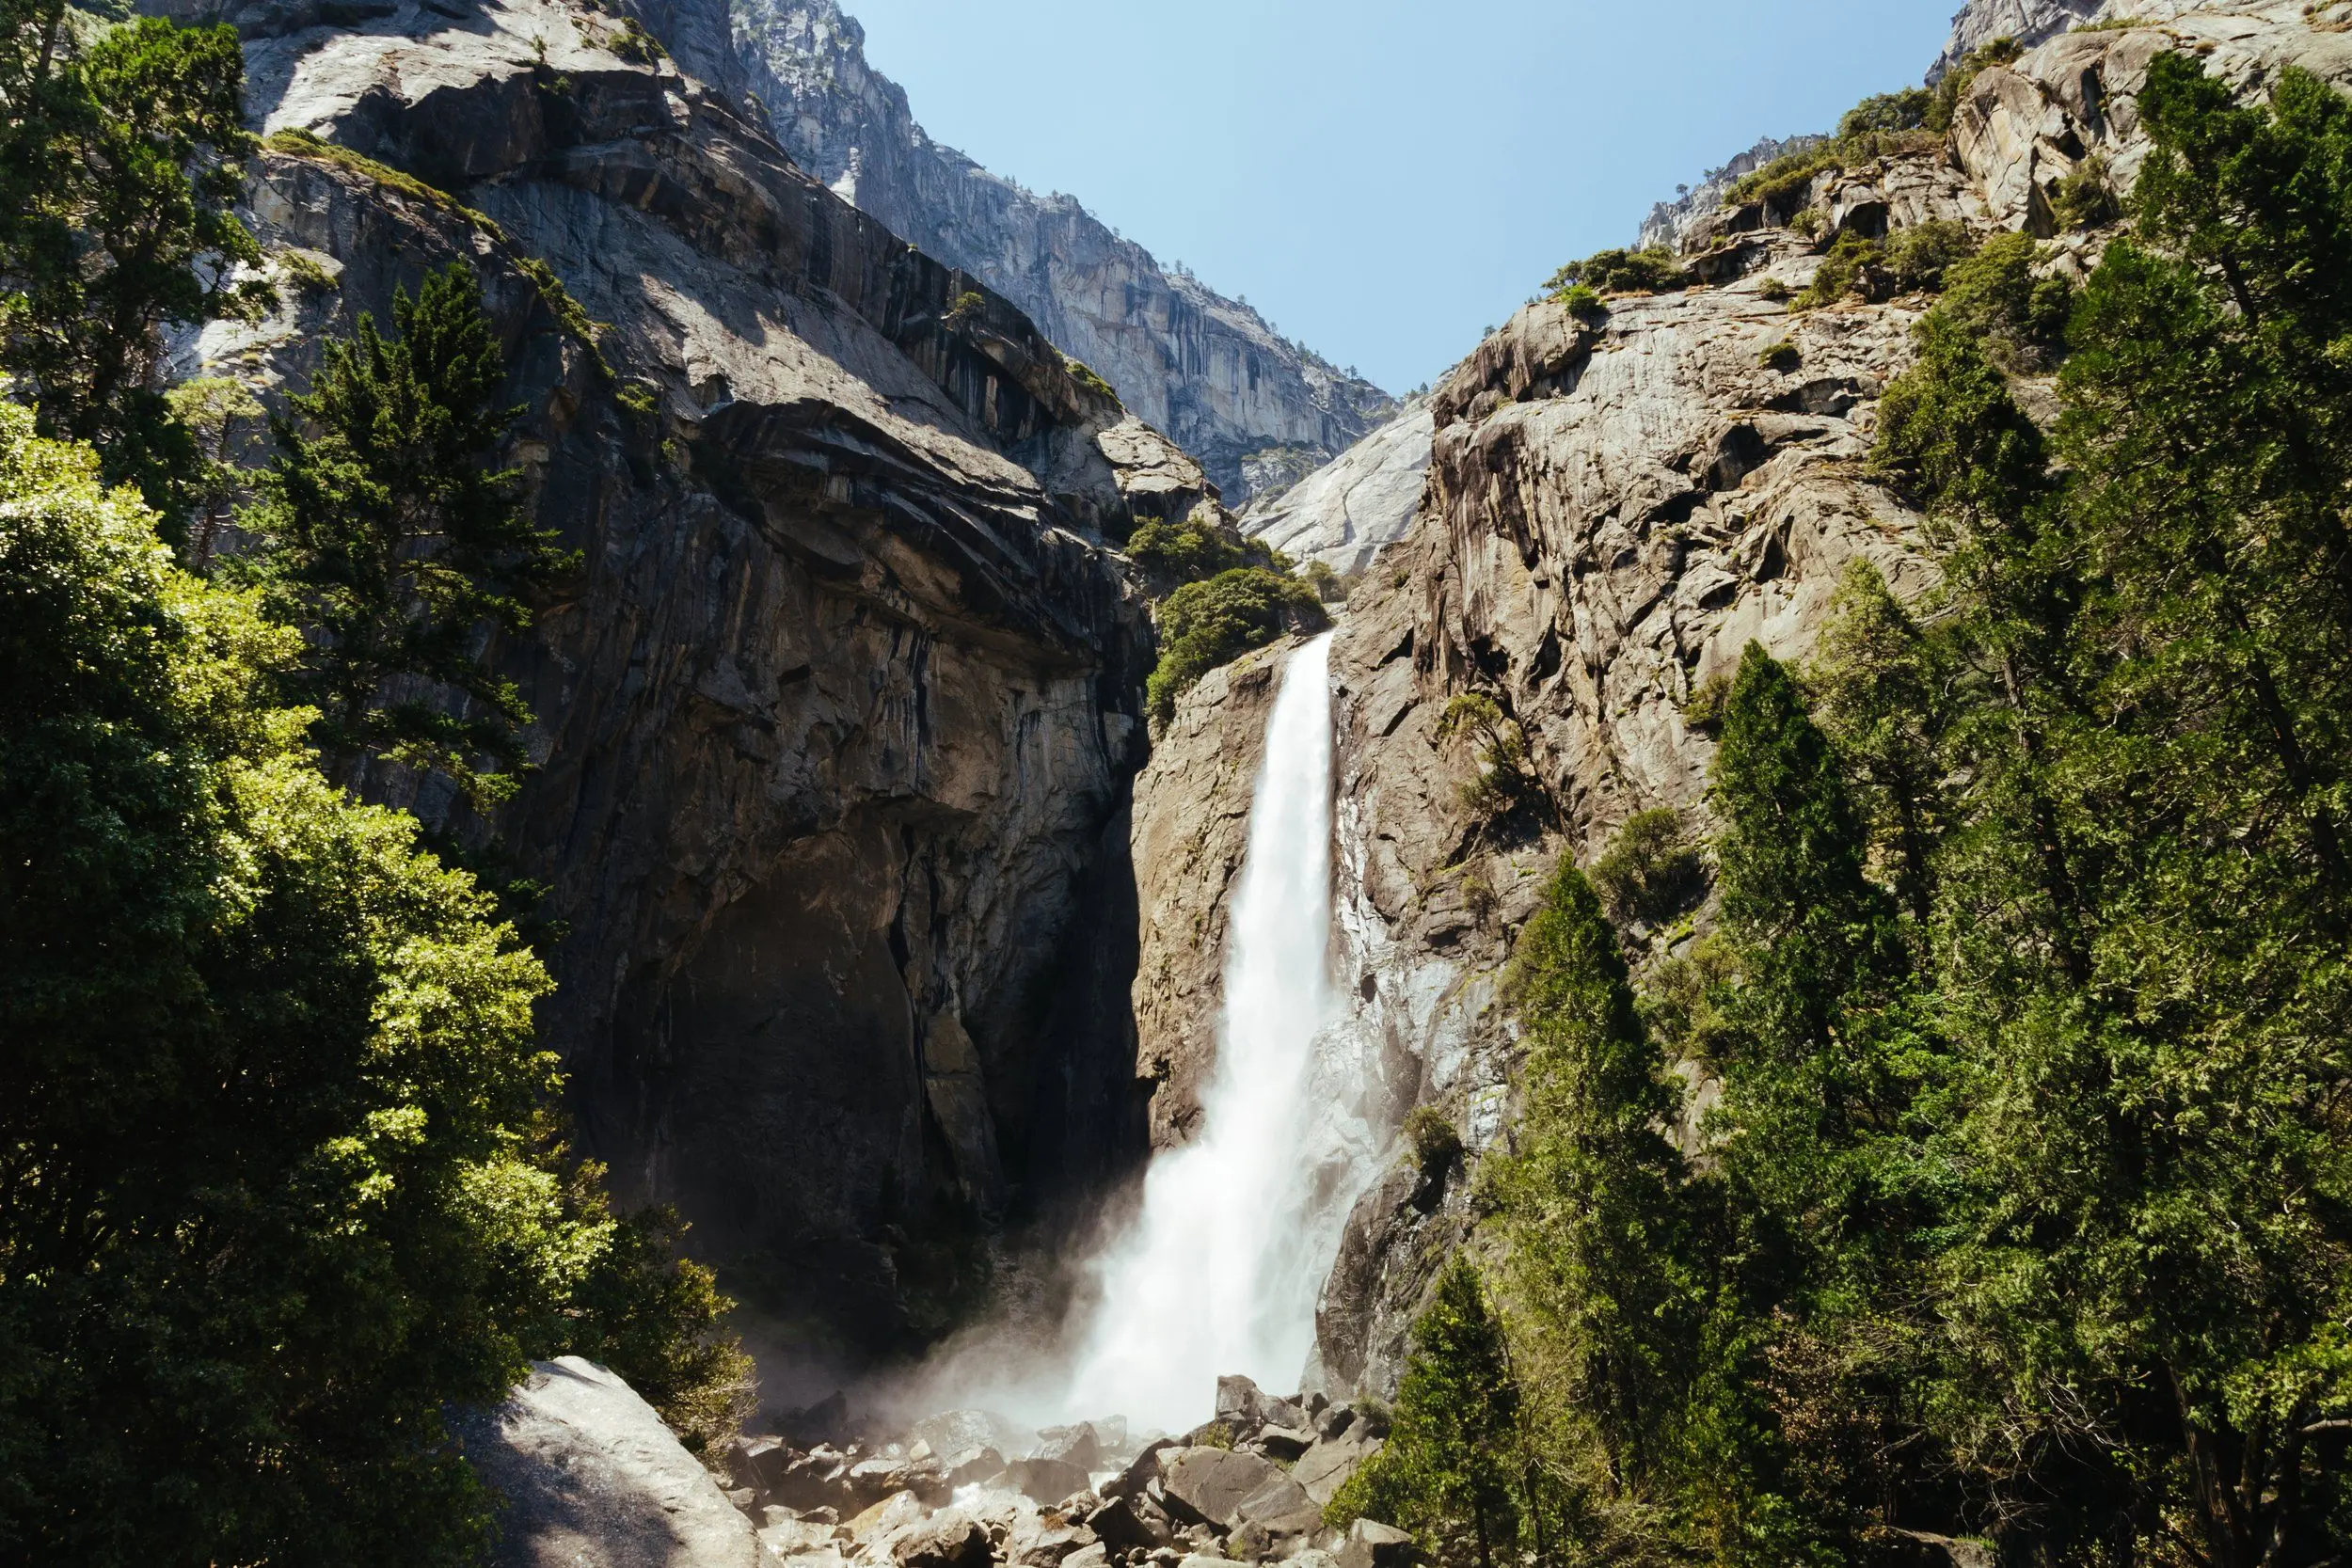 Lower Yosemite Fall surrounded by green trees during midday.